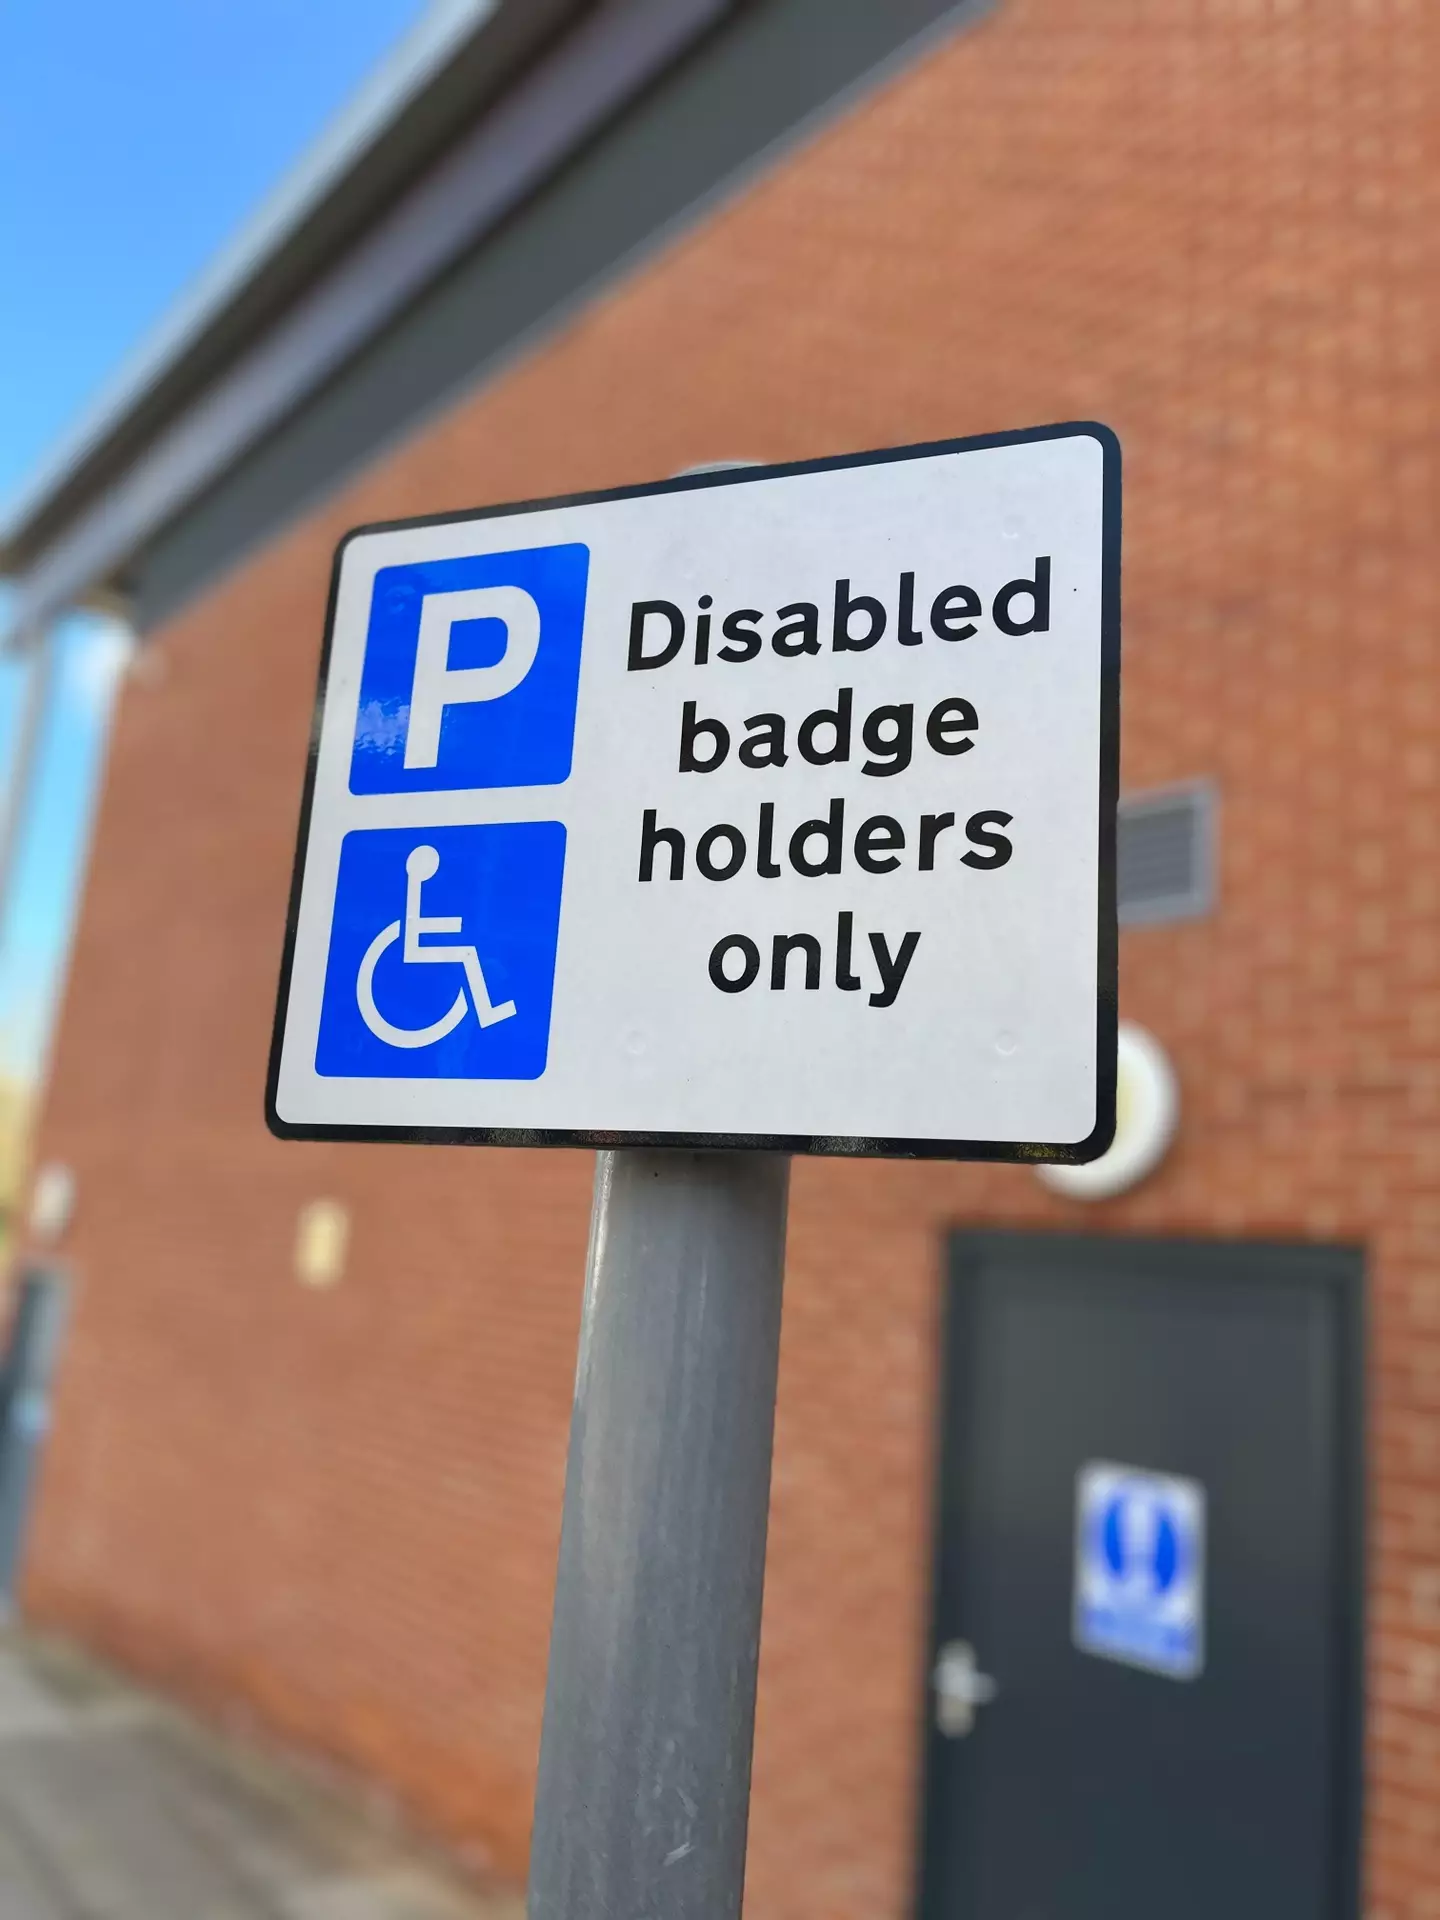 The pregnant woman was fined for parking in a disabled spot.